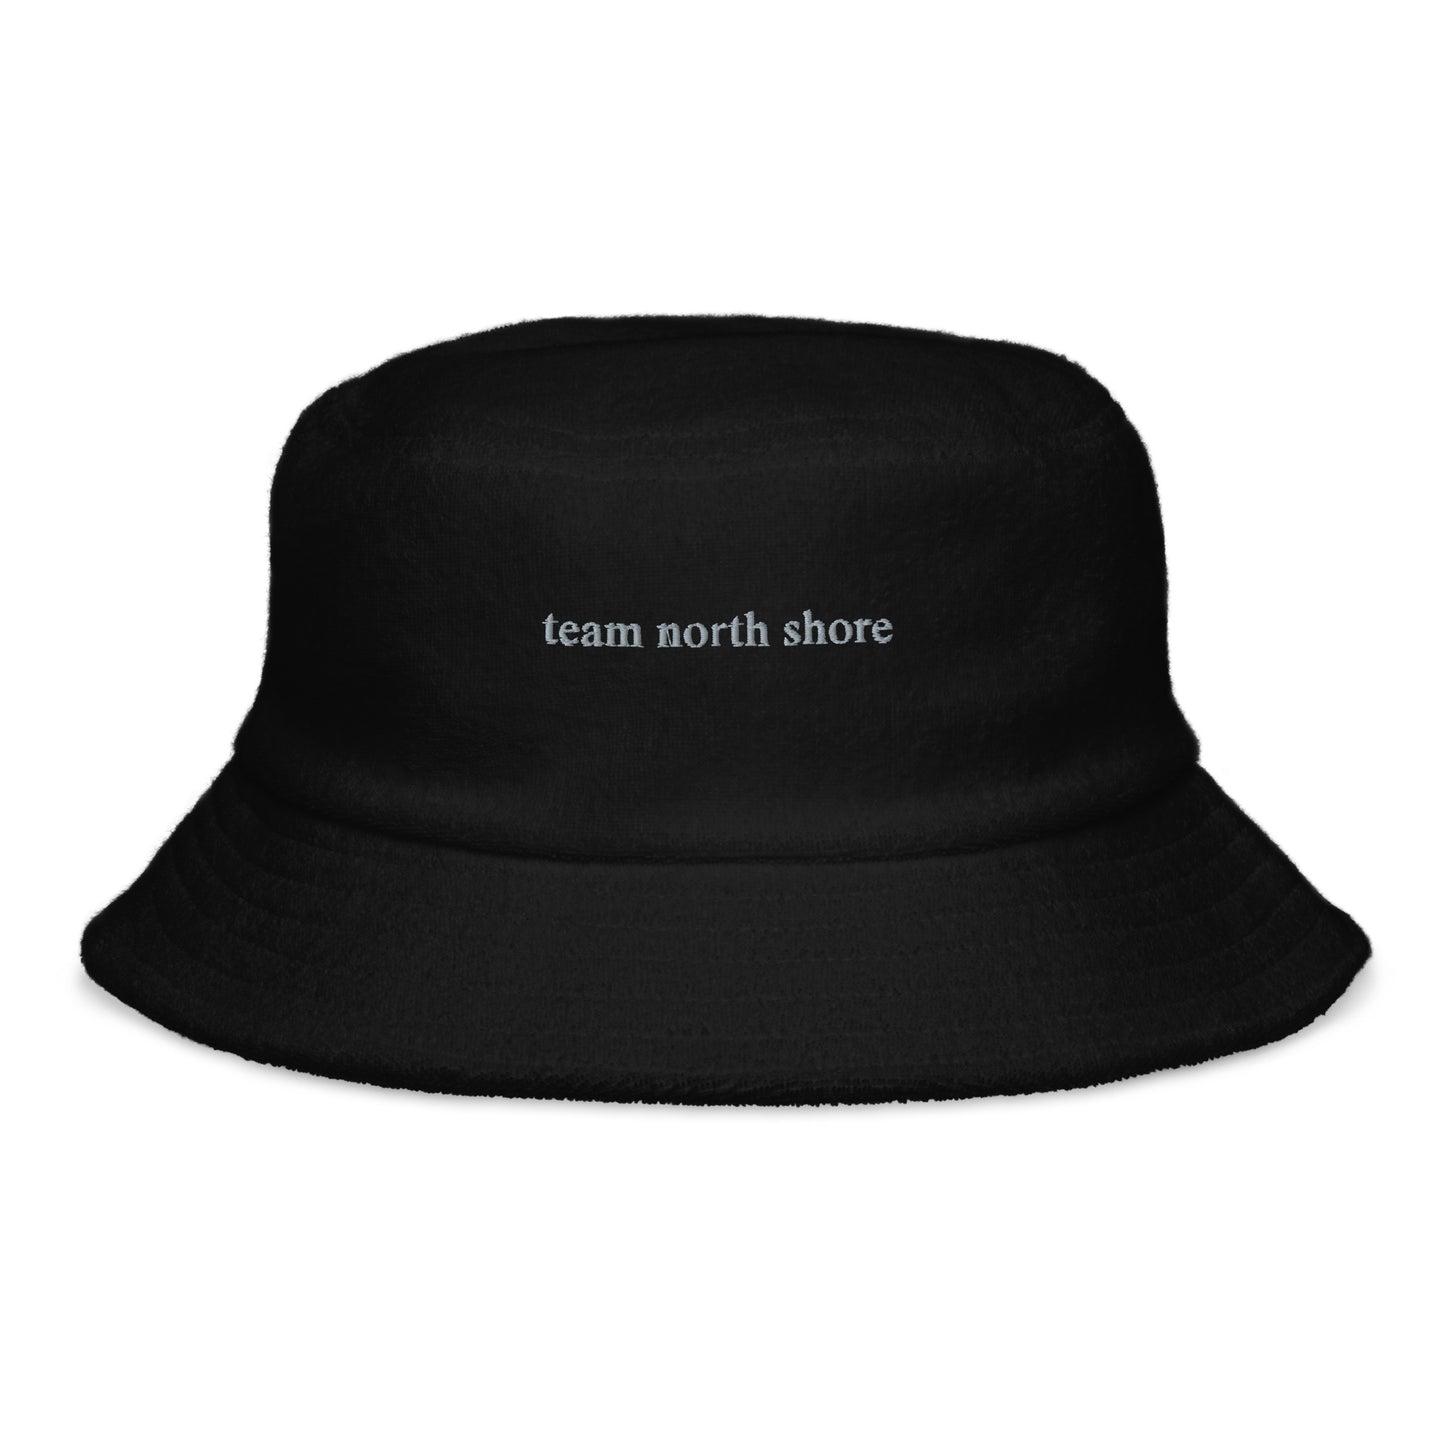 black bucket hat that says "team north shore" in grey lettering